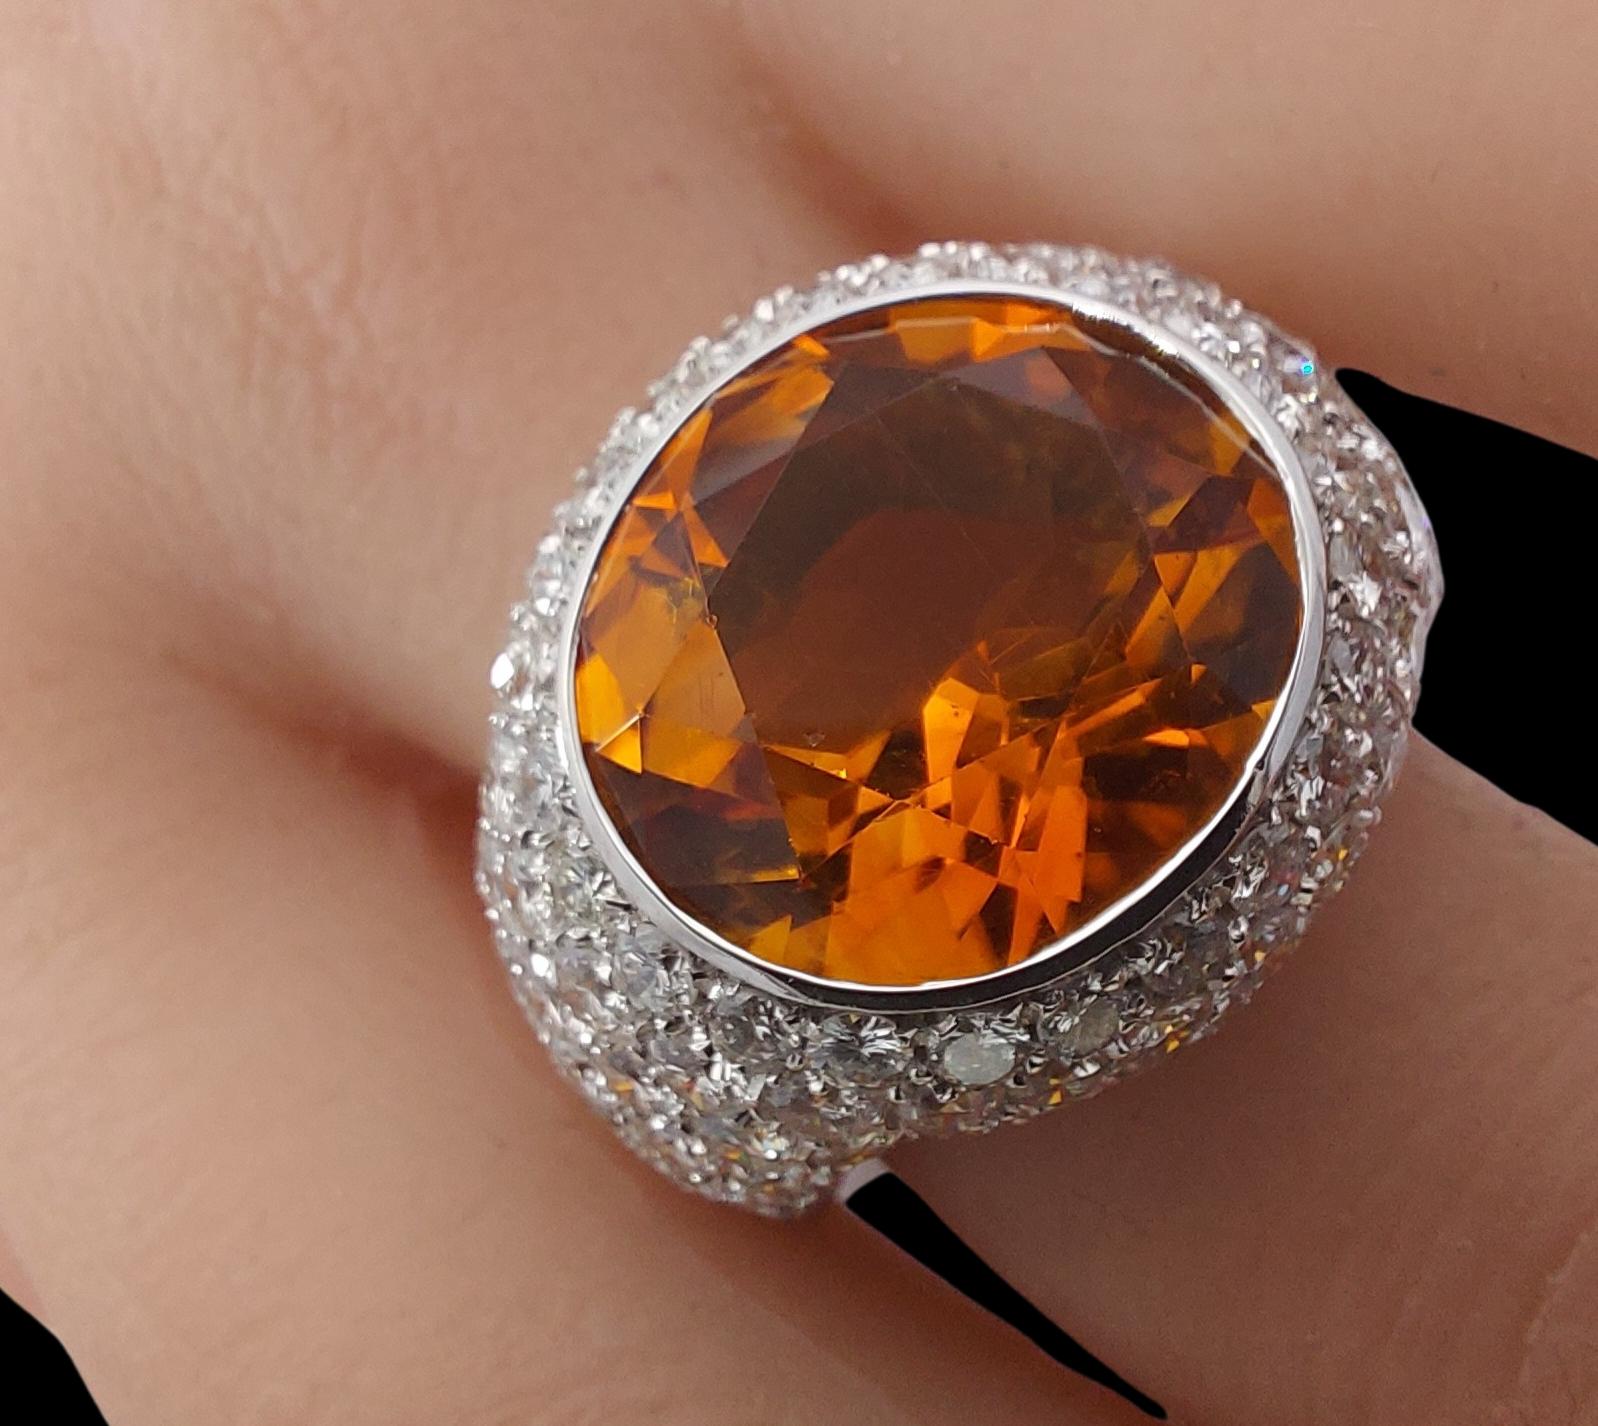 Stunning 18kt white gold ring set with diamonds and citrine stone.

Citrine: Citrine stone of approx 13.5 x 15 mm

Diamonds: White diamonds, together approx. 6.4ct diamonds

Material: Solid 18kt white gold

Total weight: 24.8 gram / 0.875 oz / 15.9